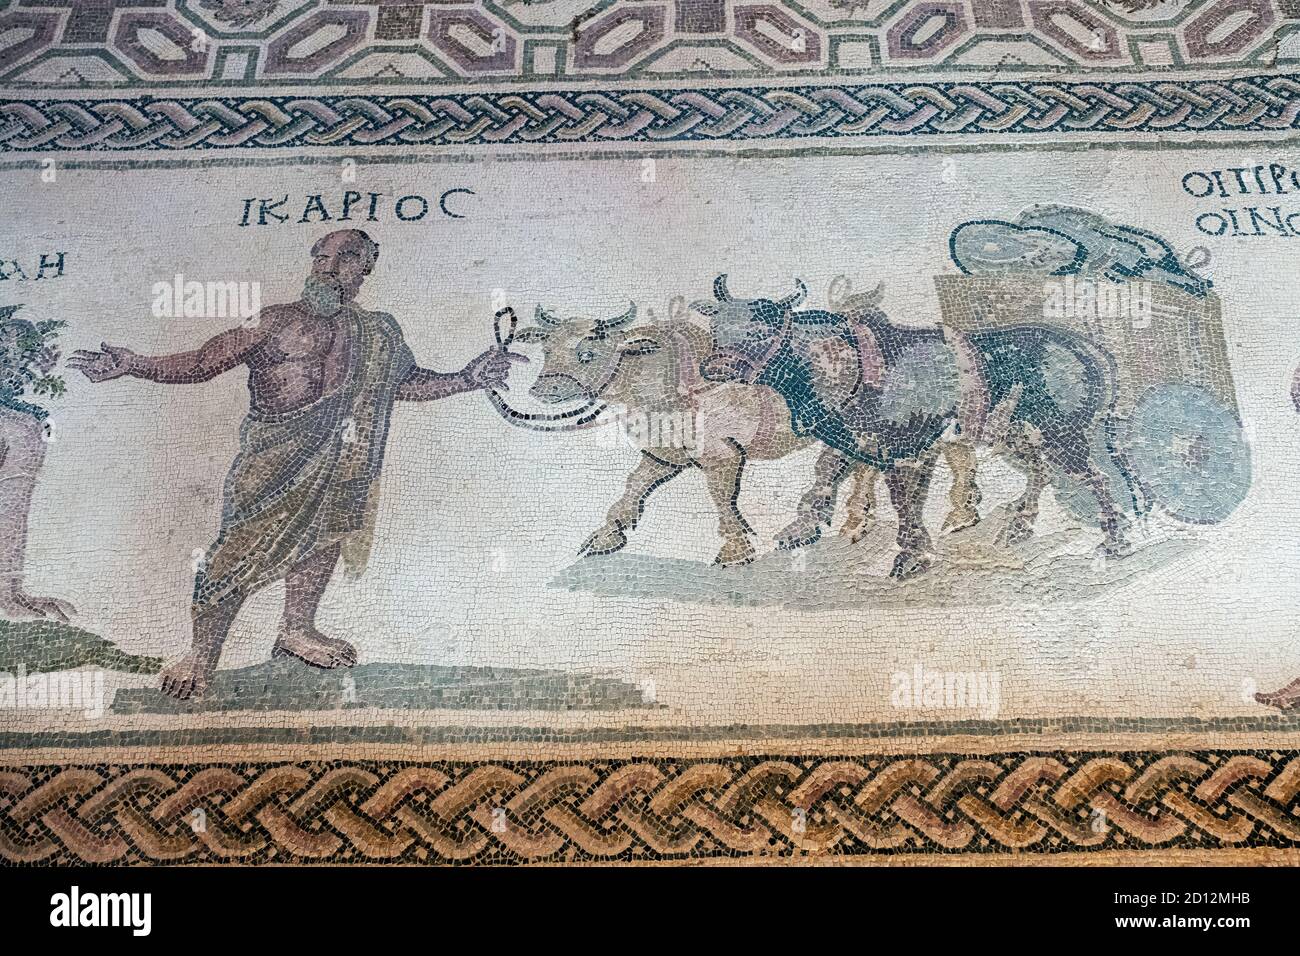 House of Dionysos, Paphos, Cyprus: Icarios depicted holding the reins of an ox-driven double wheeled cart, filled with sacks of wine. Stock Photo